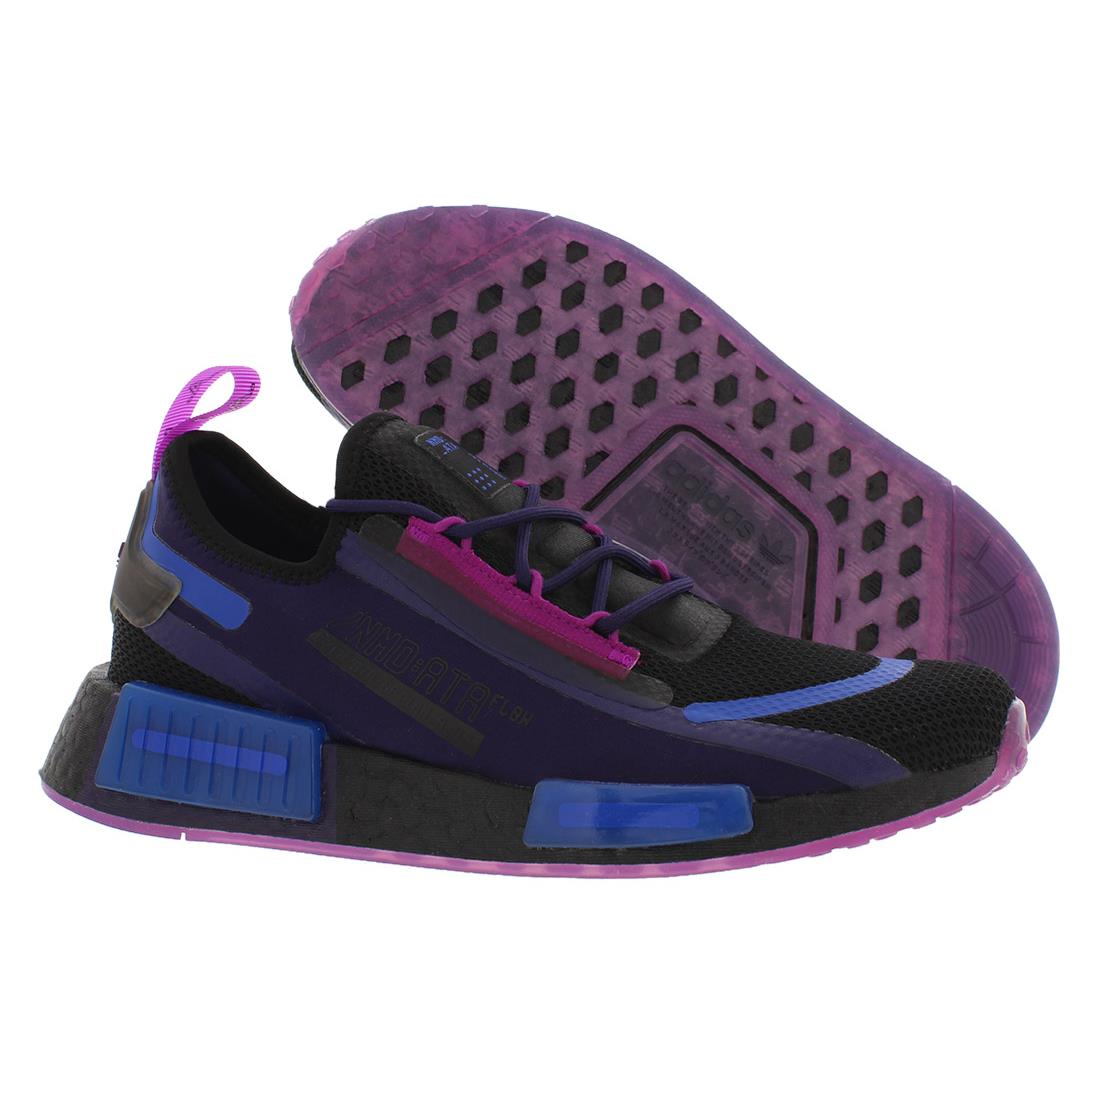 Adidas NMD_R1 Spectoo Womens Shoes Purple